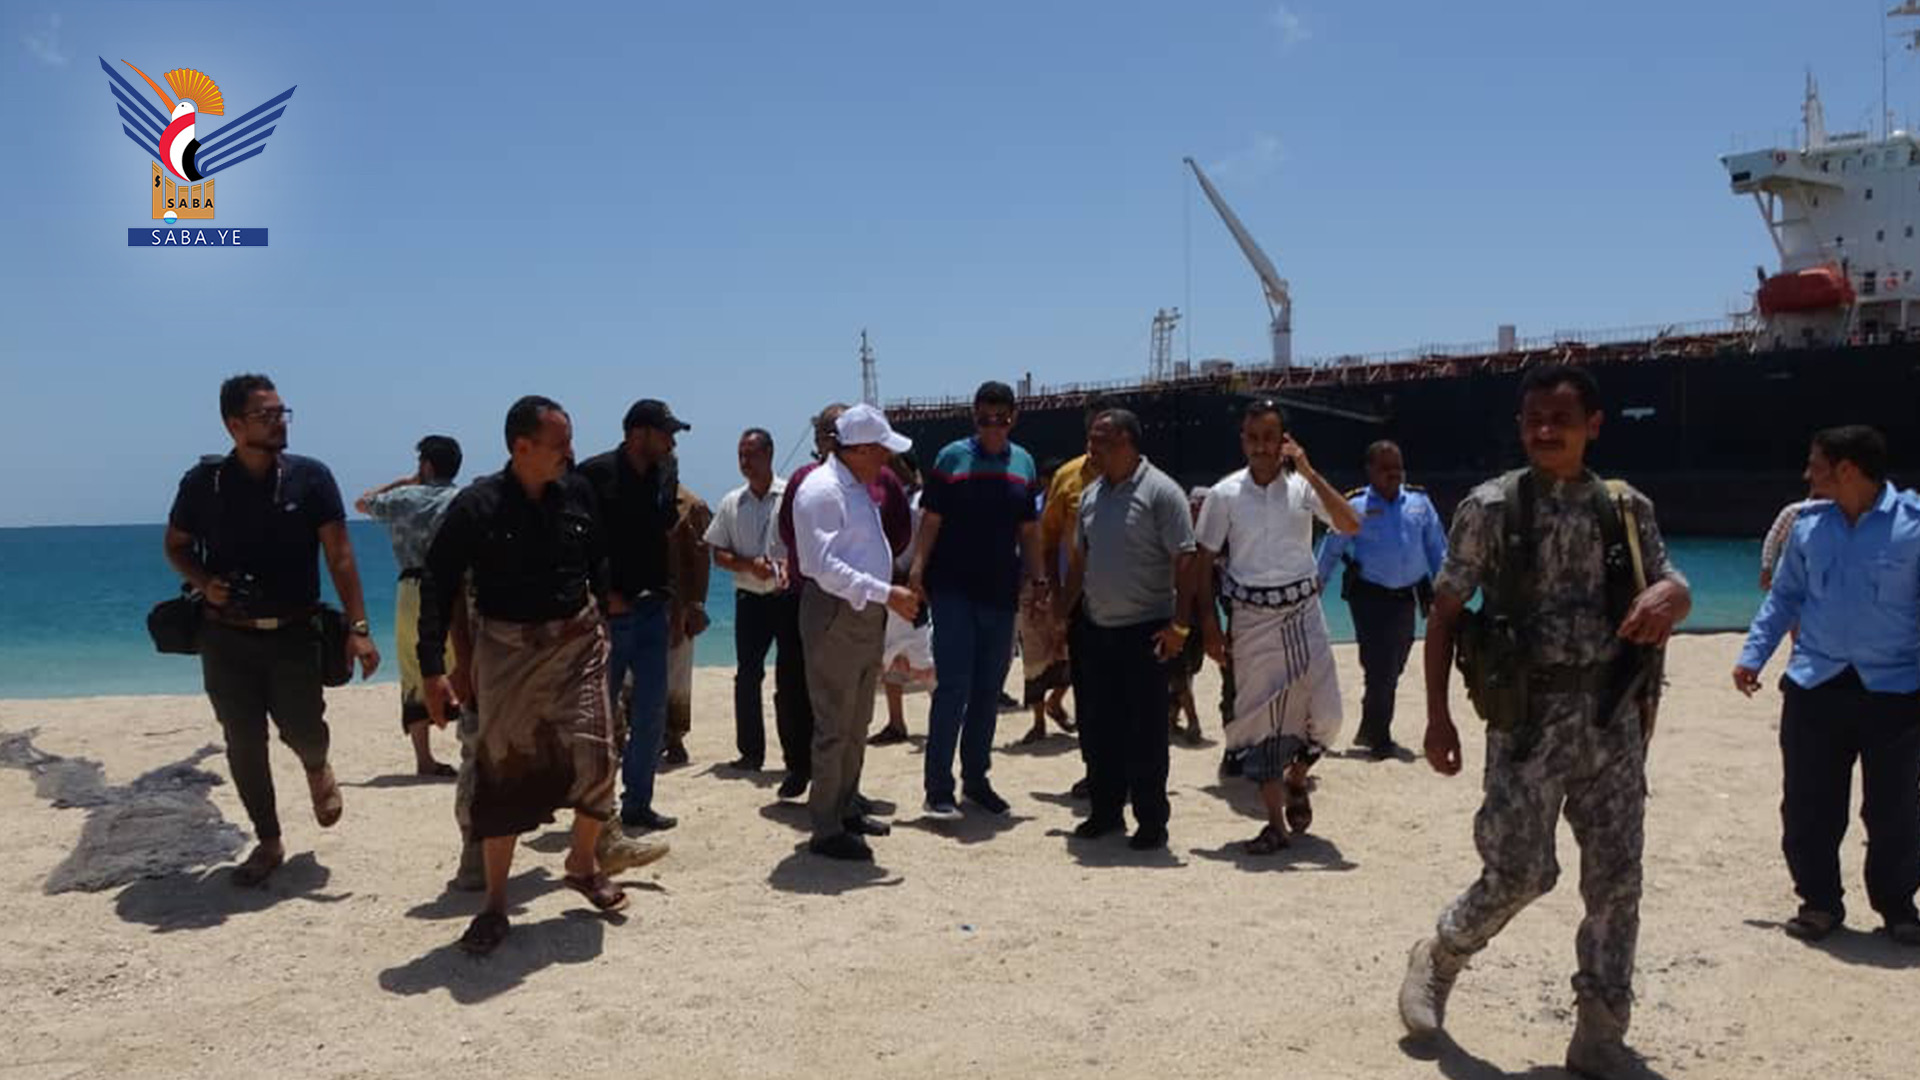 Transport Minister inspects maritime & commercial activity at Salif Port & Ras Issa Marina